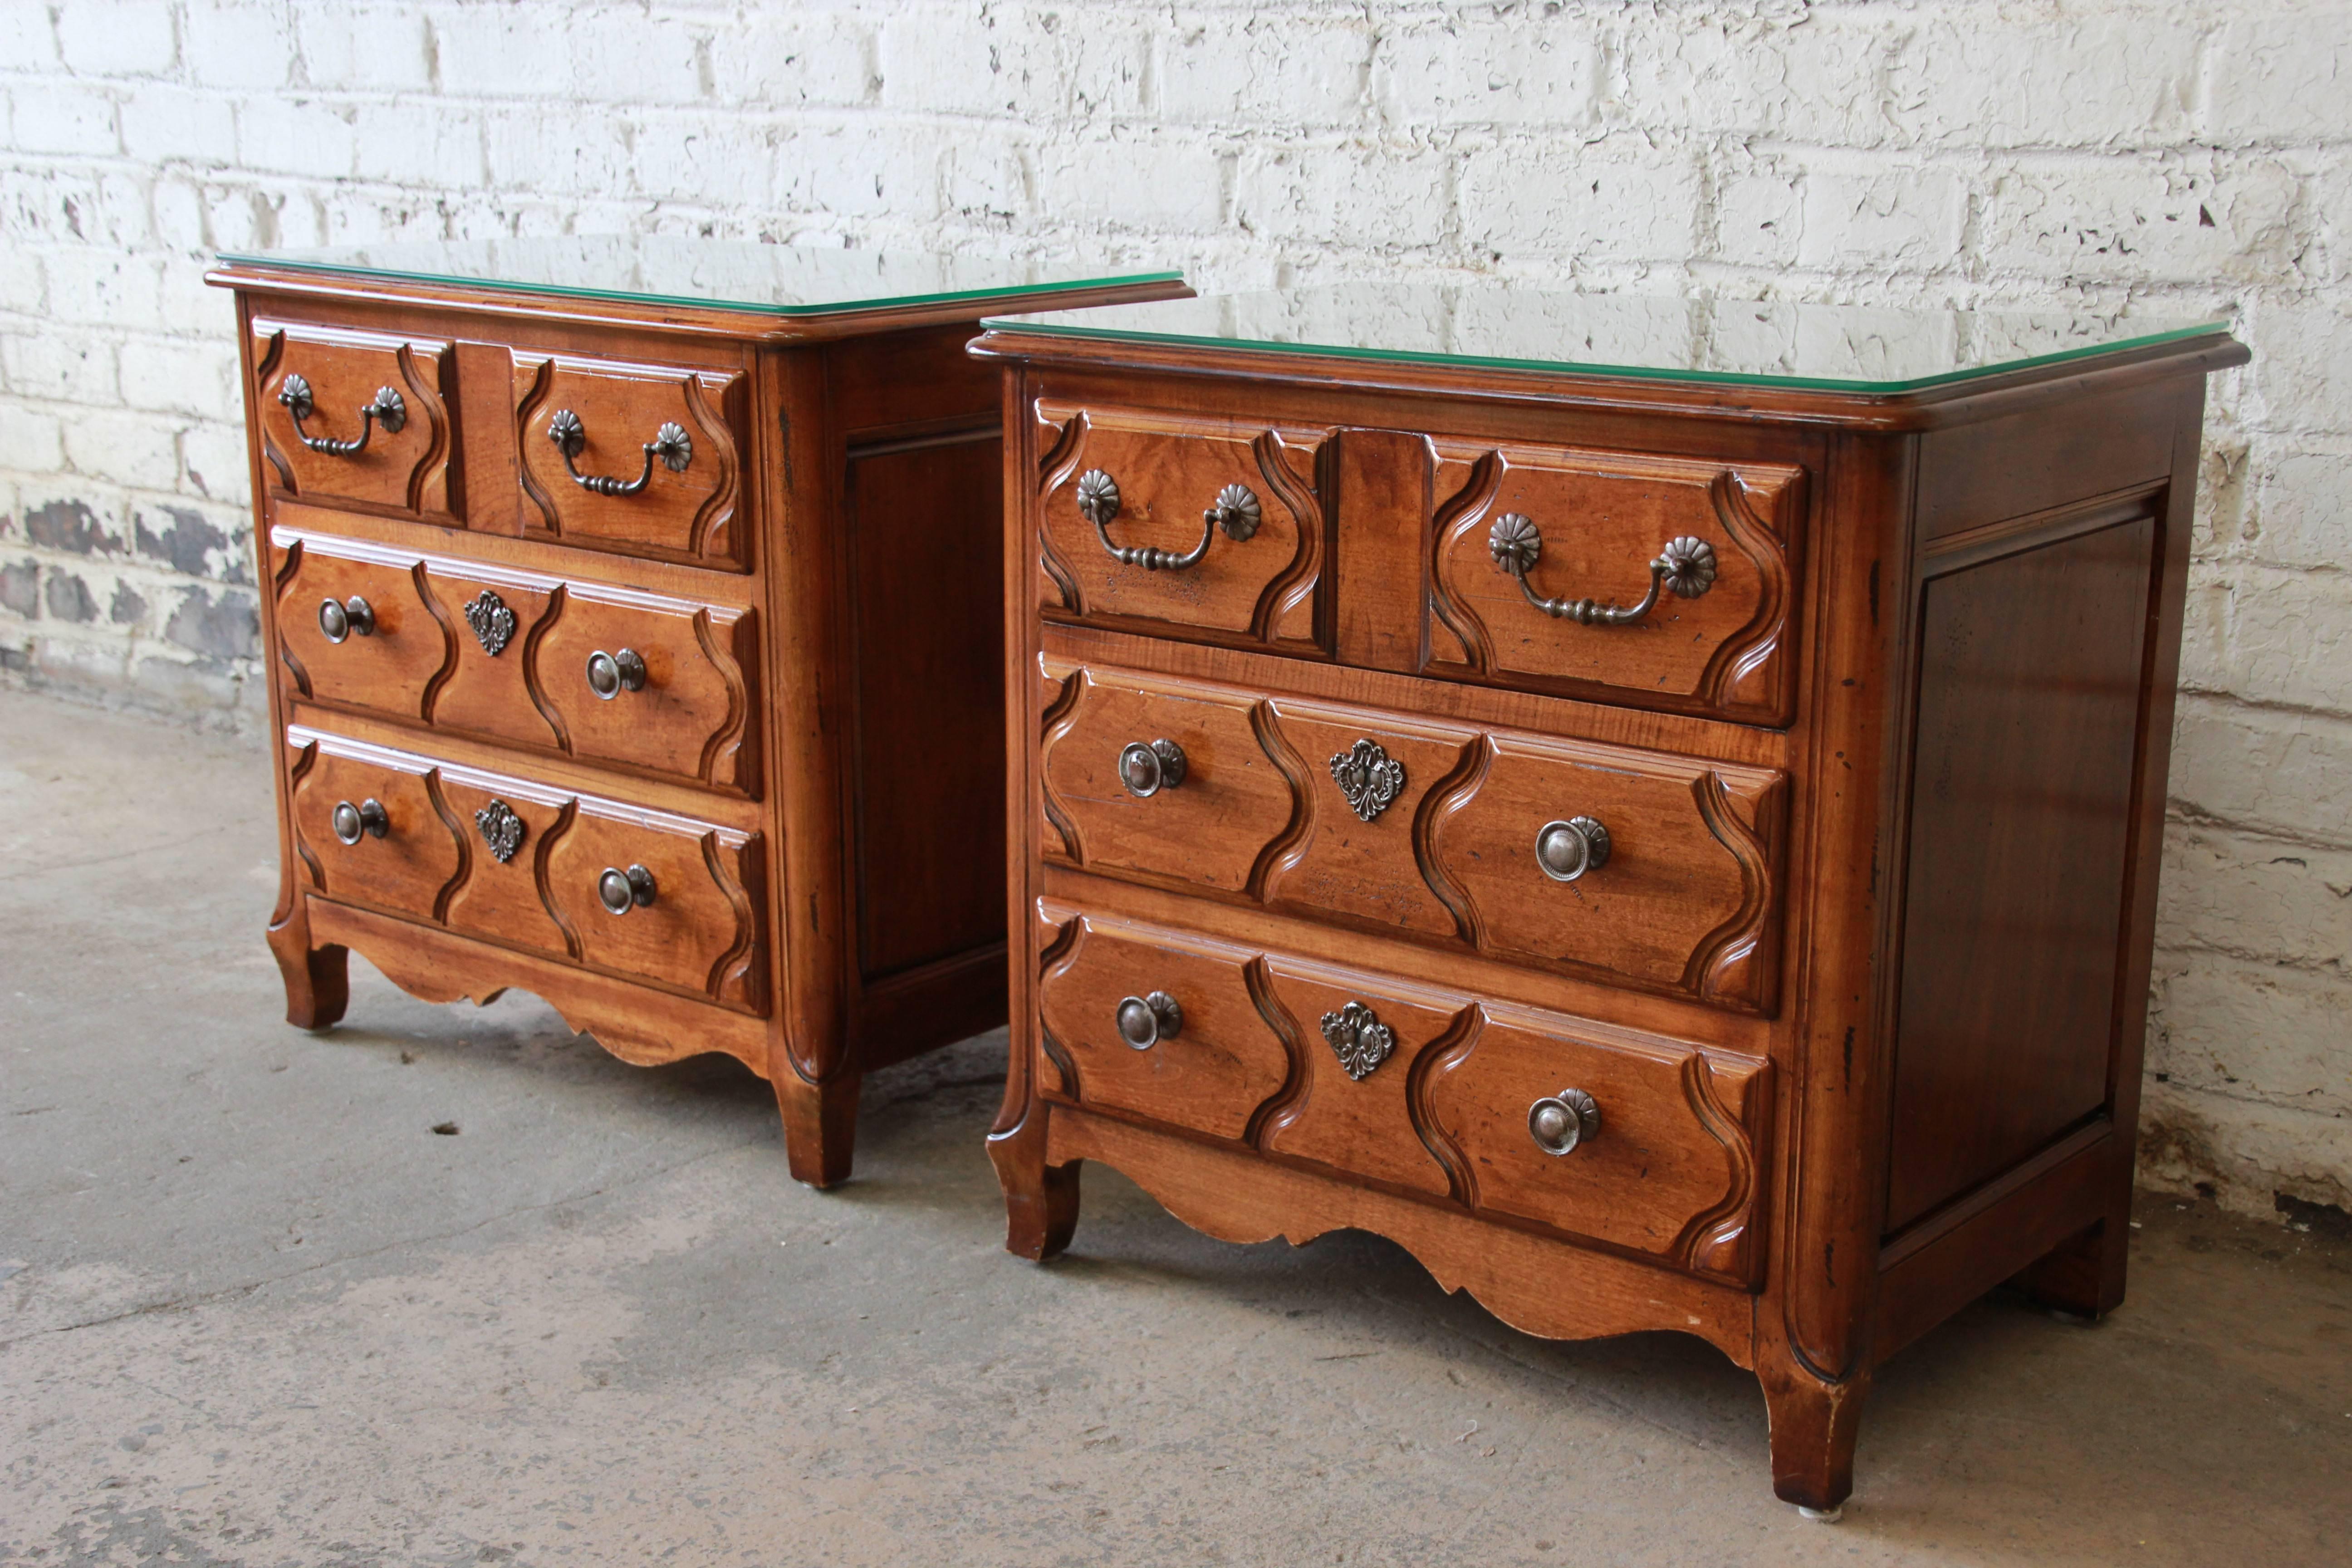 A gorgeous pair of solid cheerywood three-drawer chests or nightstands from the Pierre Deux French Country collection by Henredon. The chests feature stunning carved wood details and original hardware. They offer ample room for storage, each with